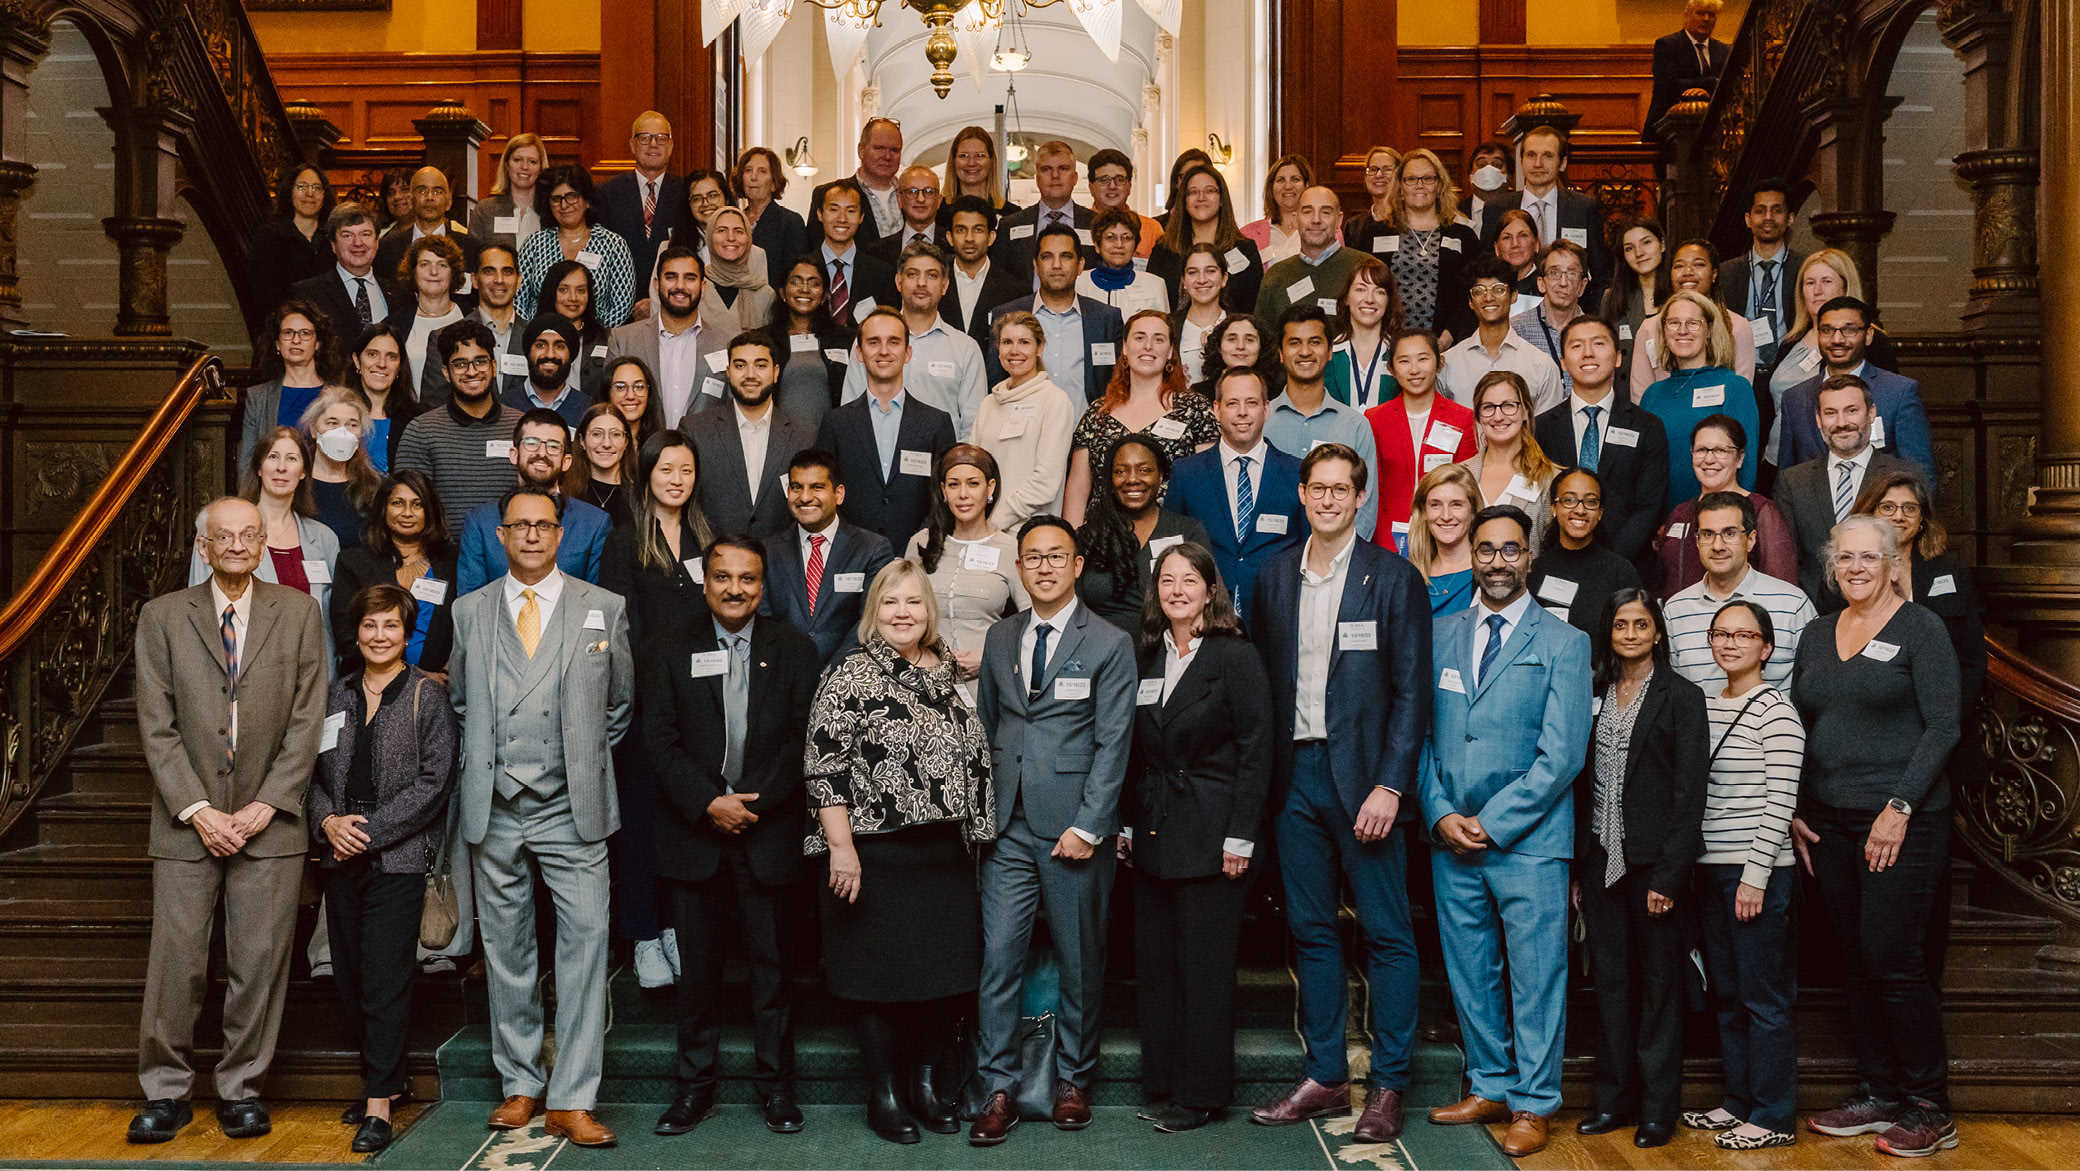 OMA group shot at Queen's Park